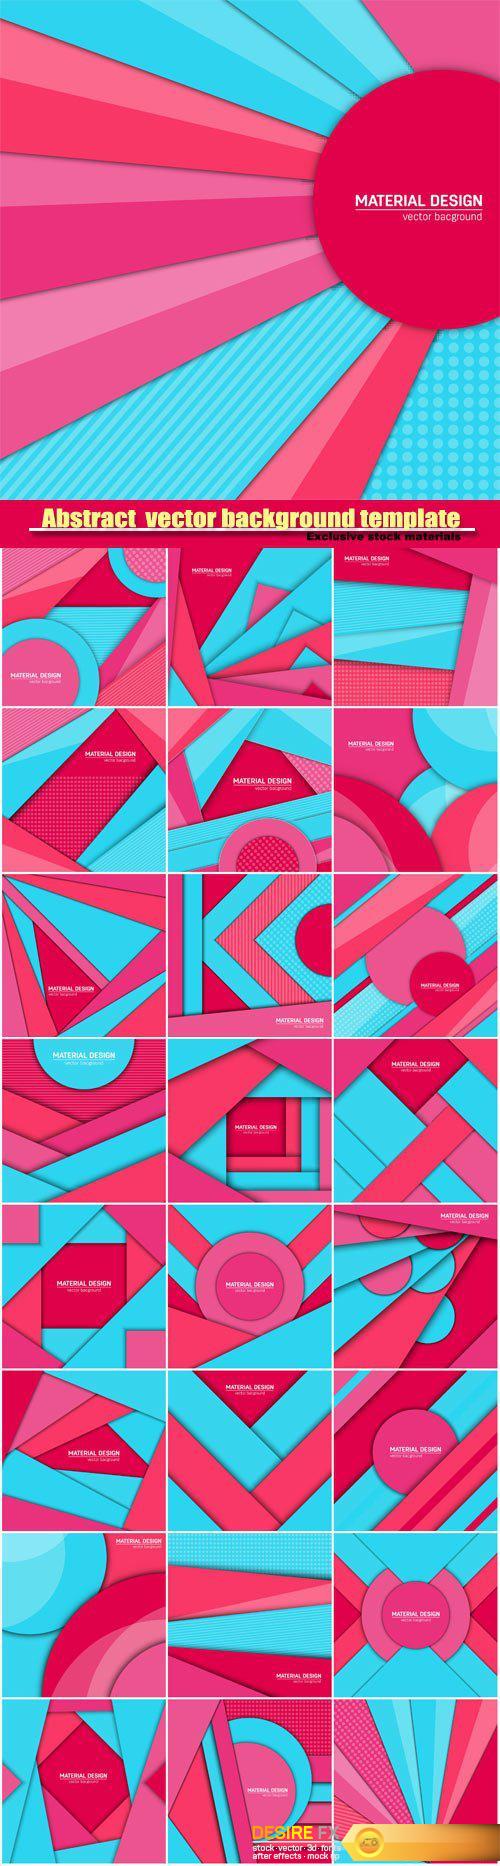 Abstract creative layout vector background template #5